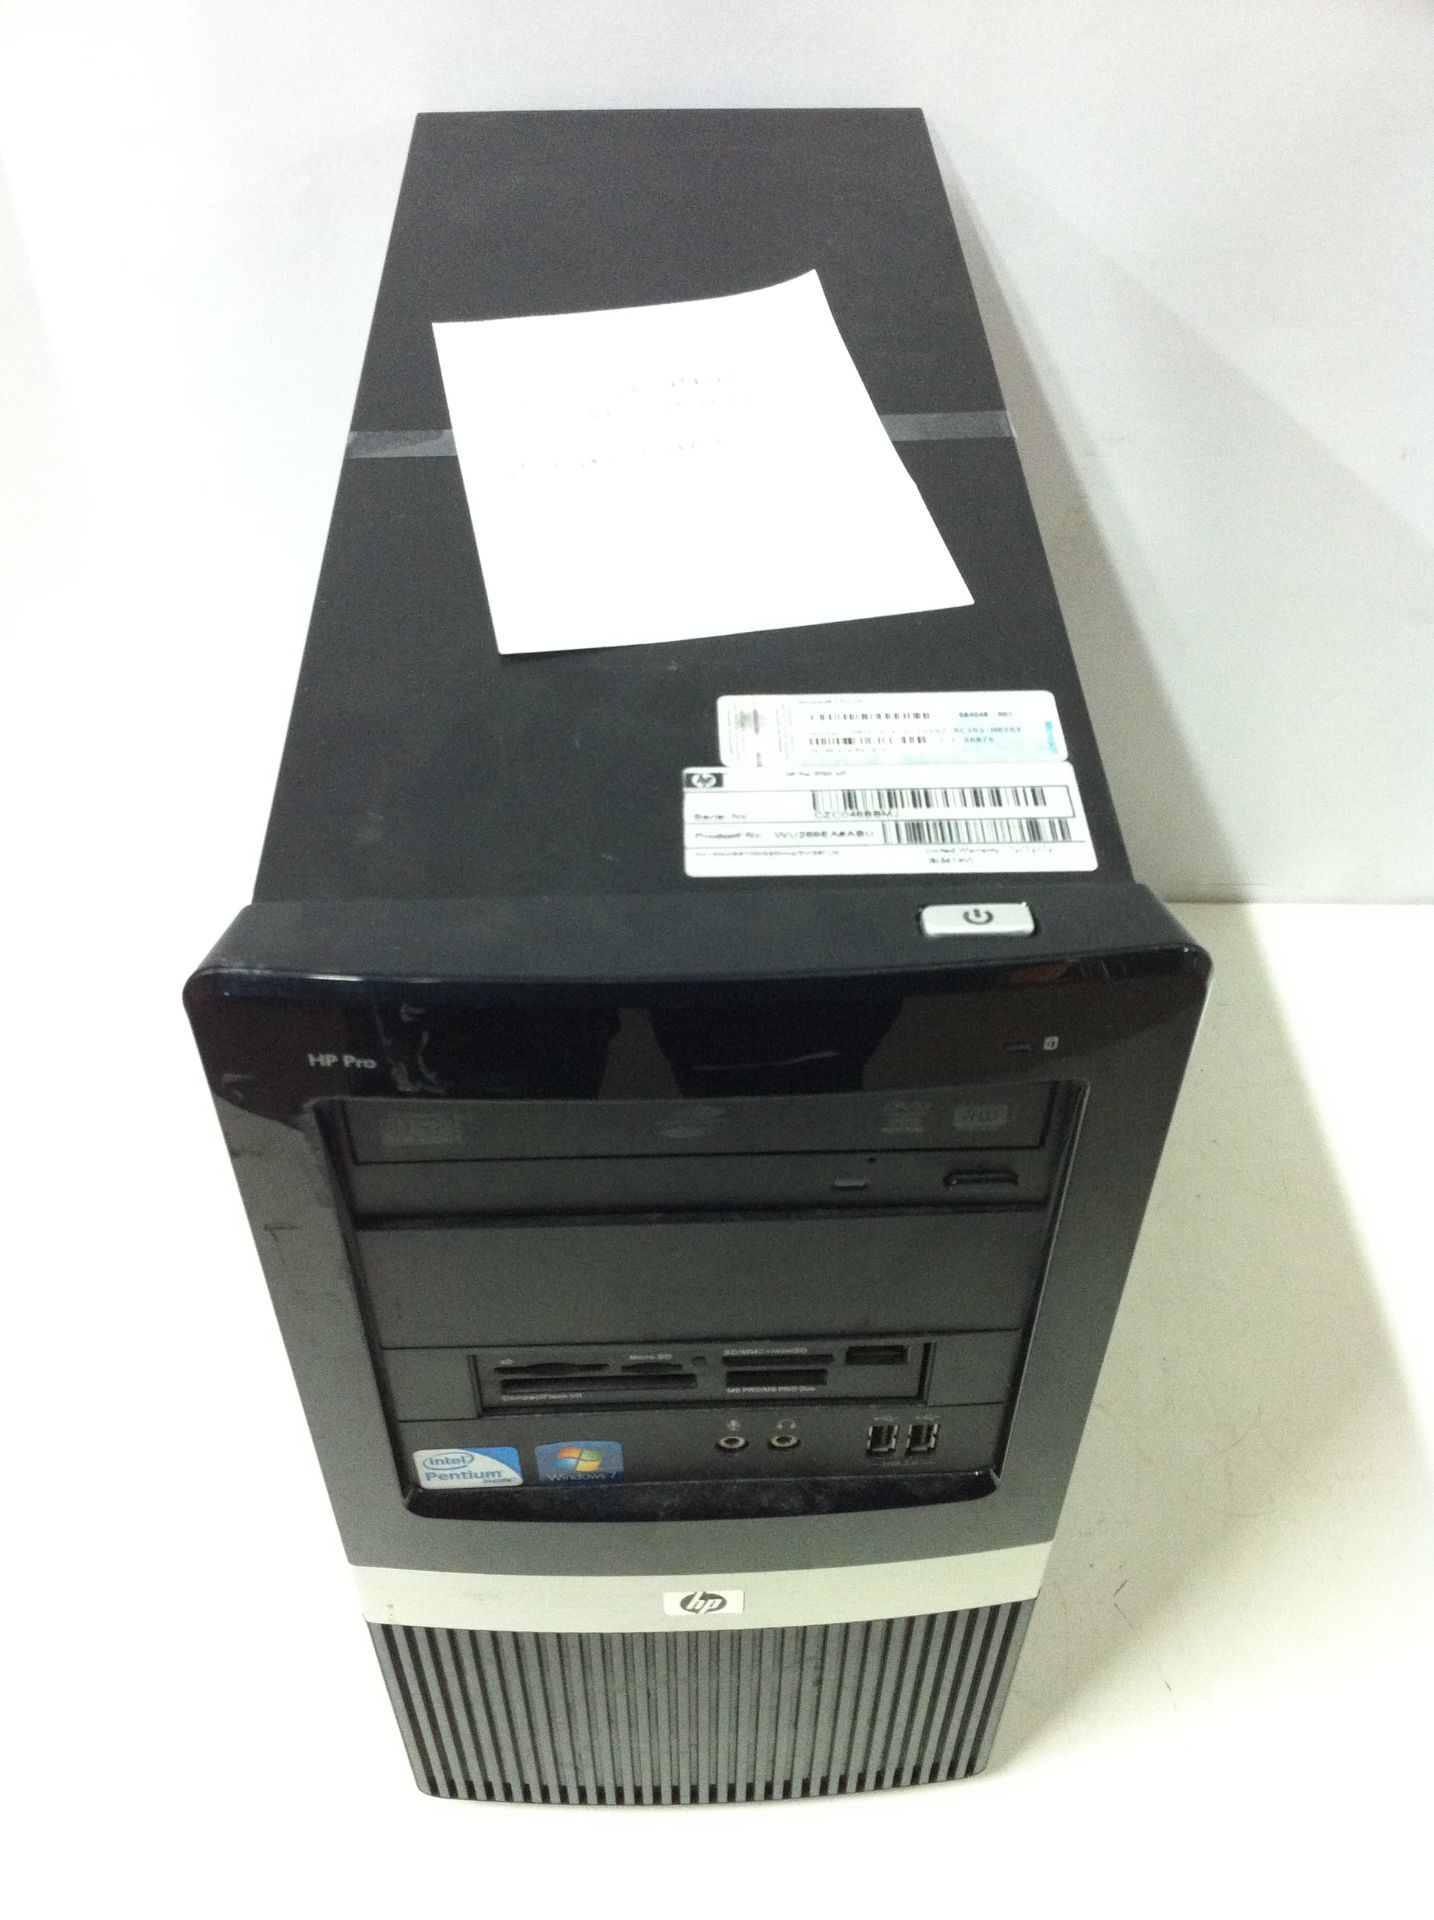 4 x HP Pro Desktop PC's, see description for specifications - Image 5 of 5